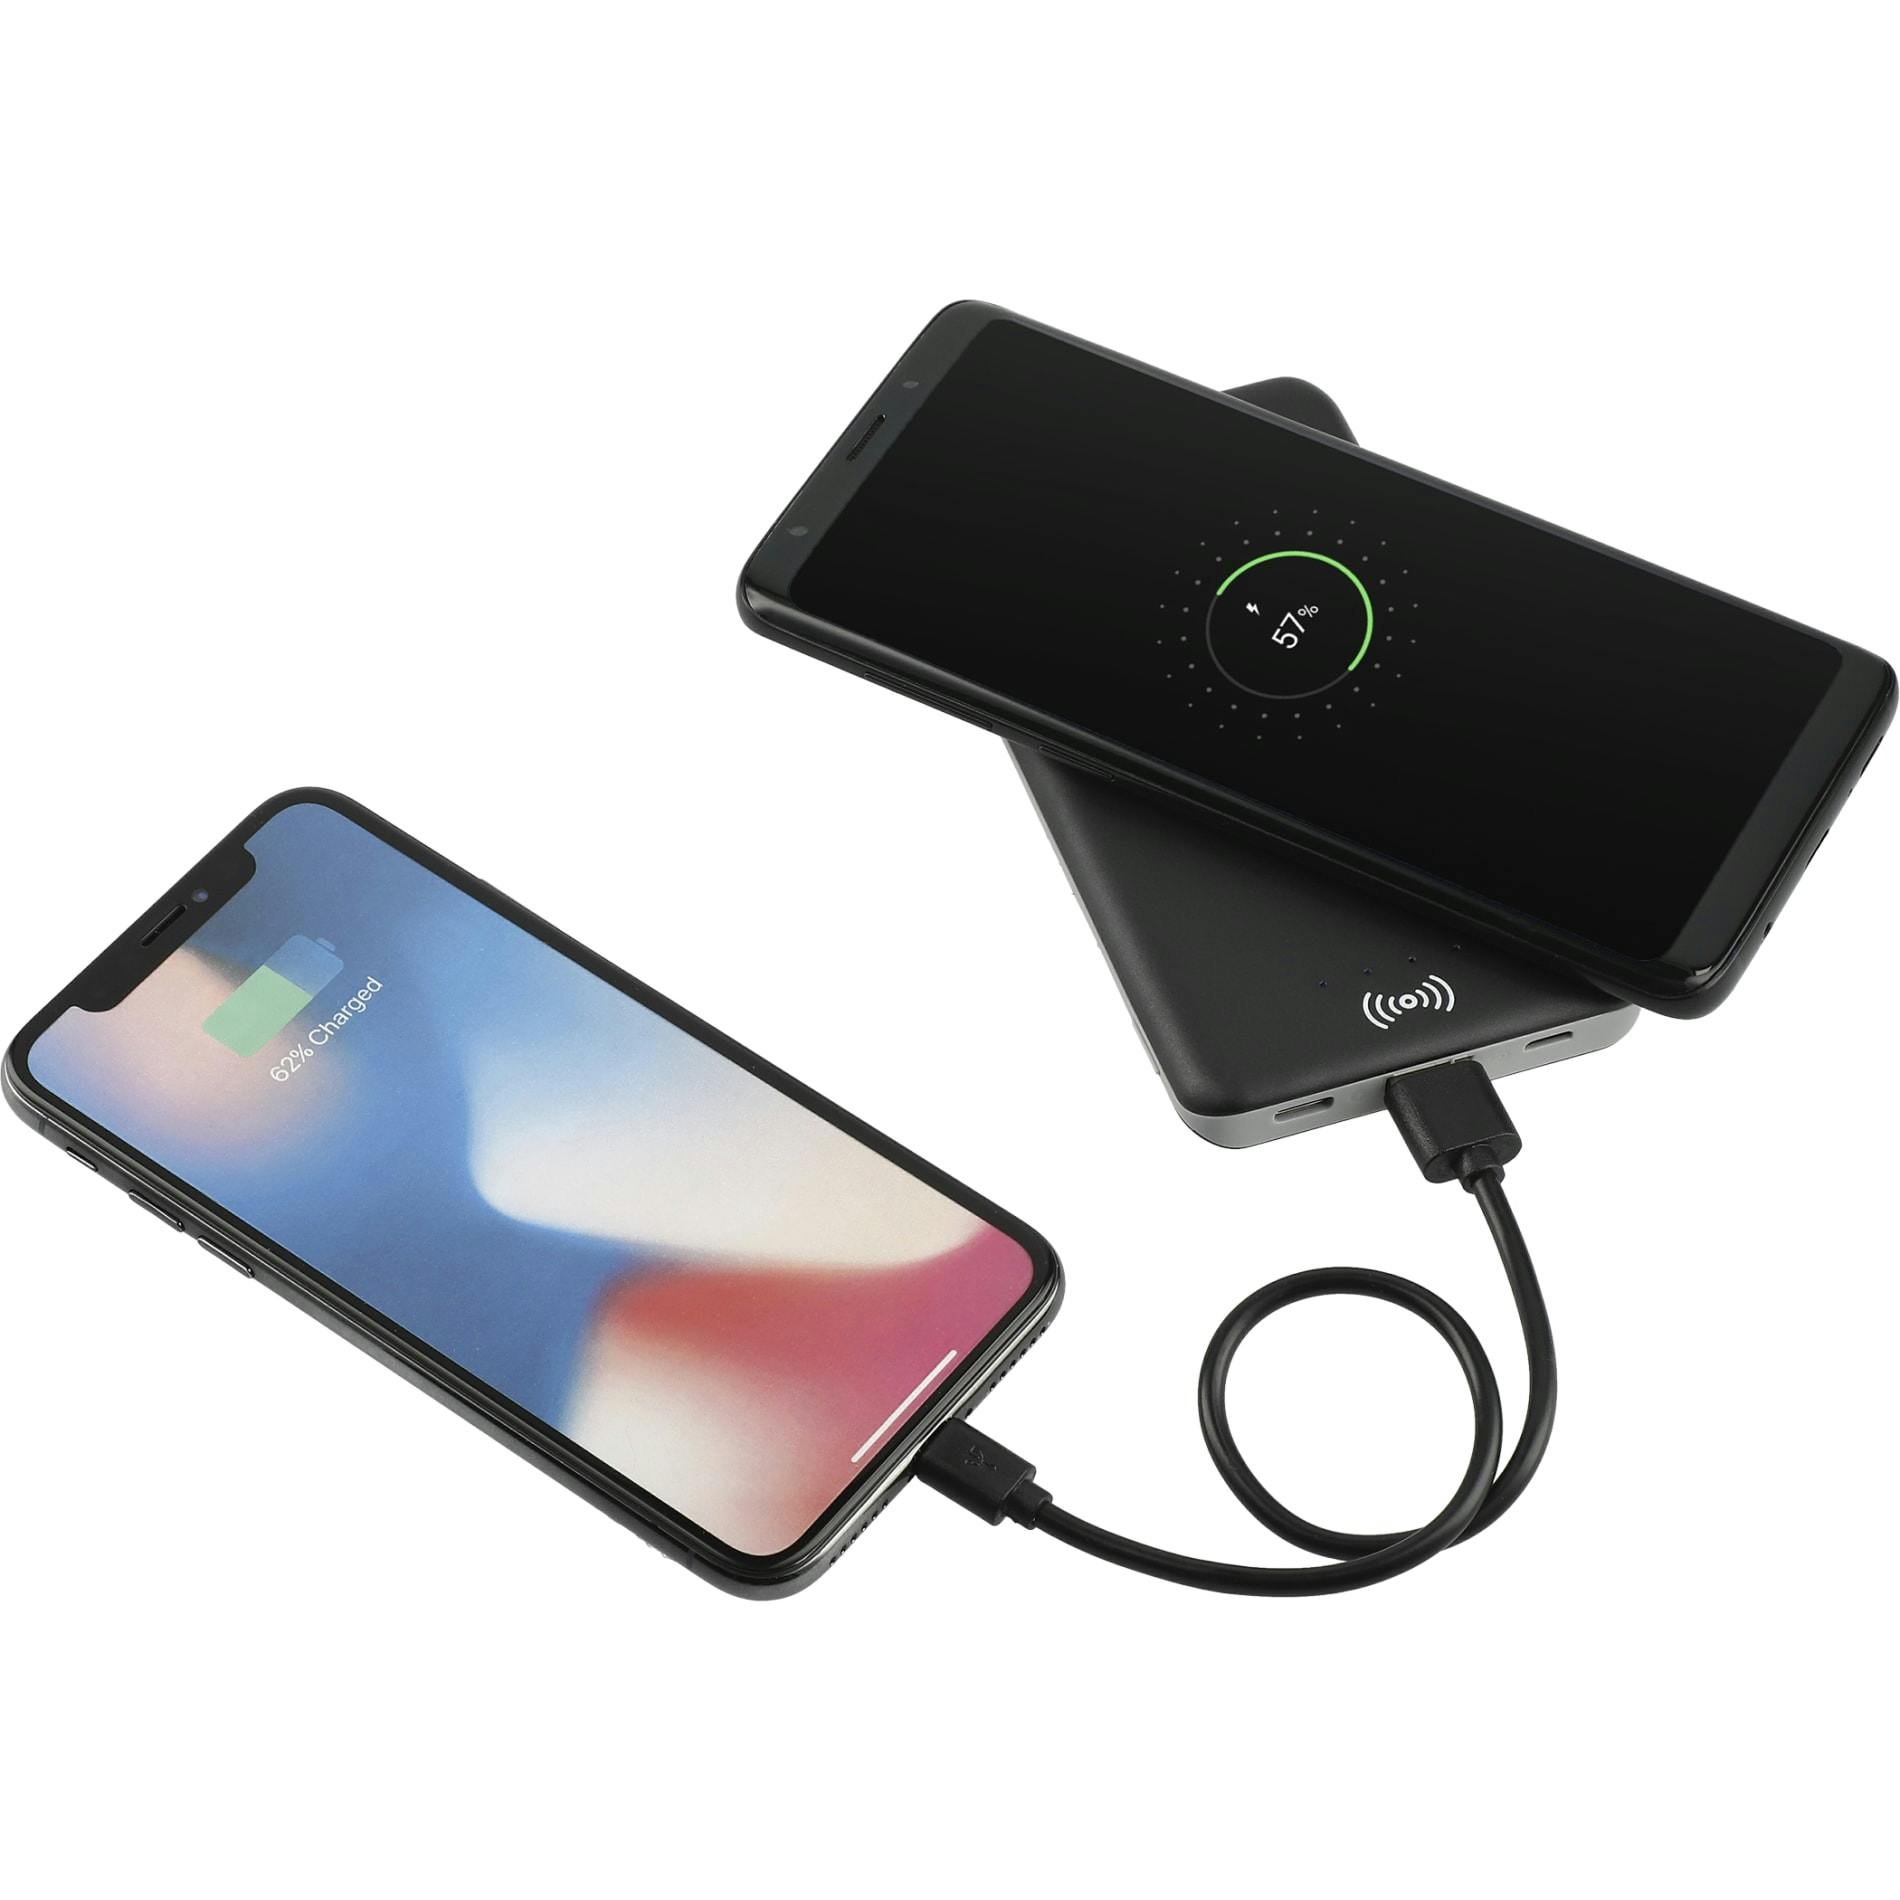 Axial 4000 mAh Wireless Power Bank - additional Image 5